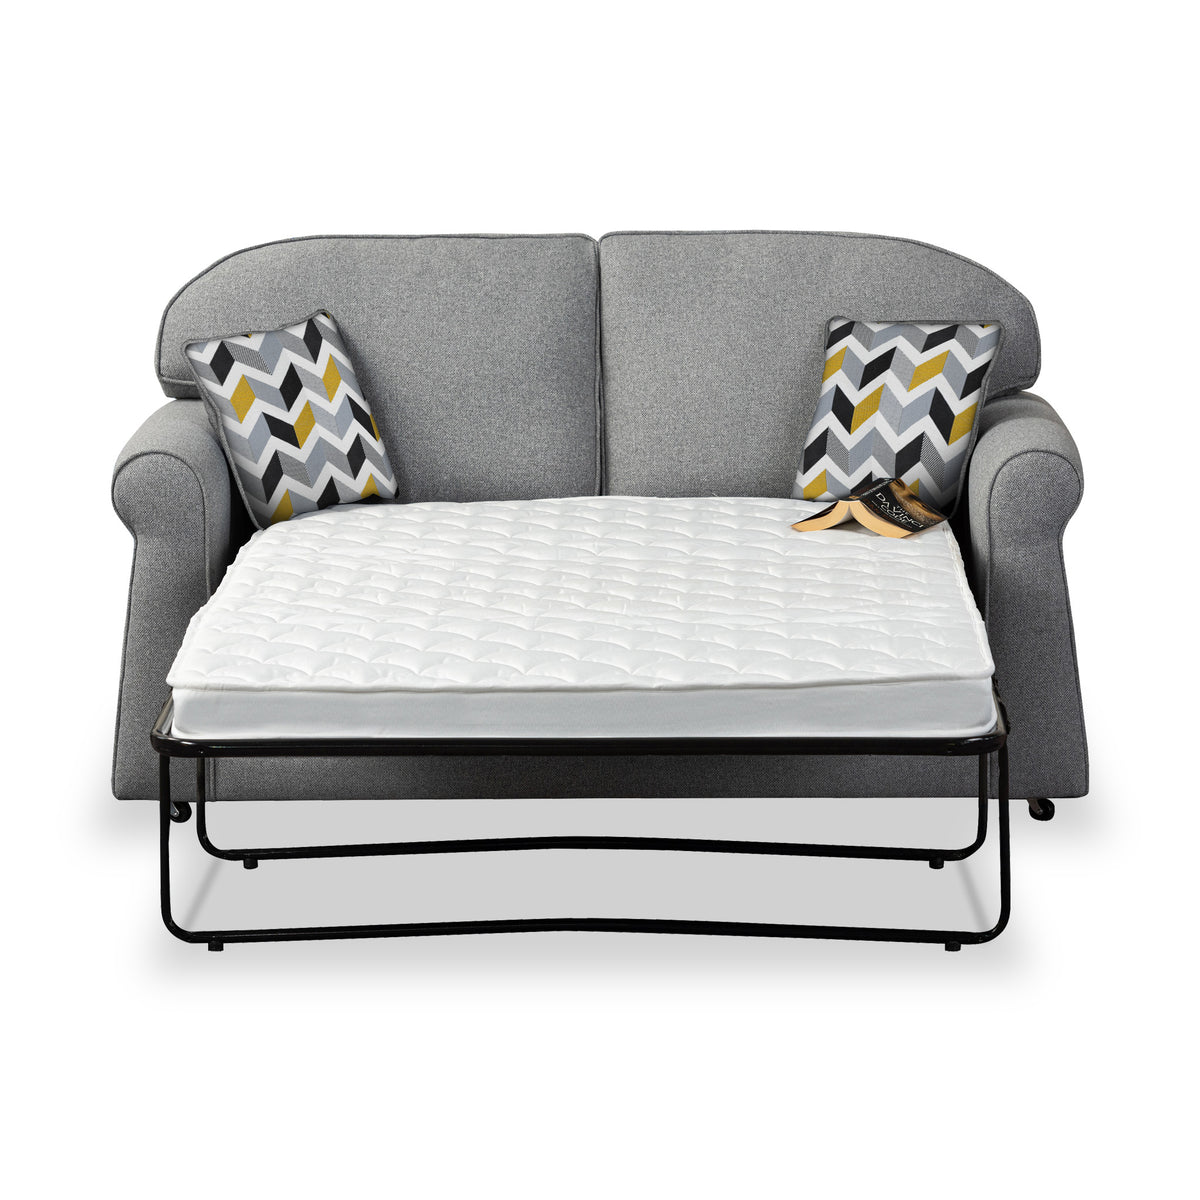 Croxdon Silver Faux Linen 2 Seater Sofabed with Mustard Scatter Cushions from Roseland Furniture